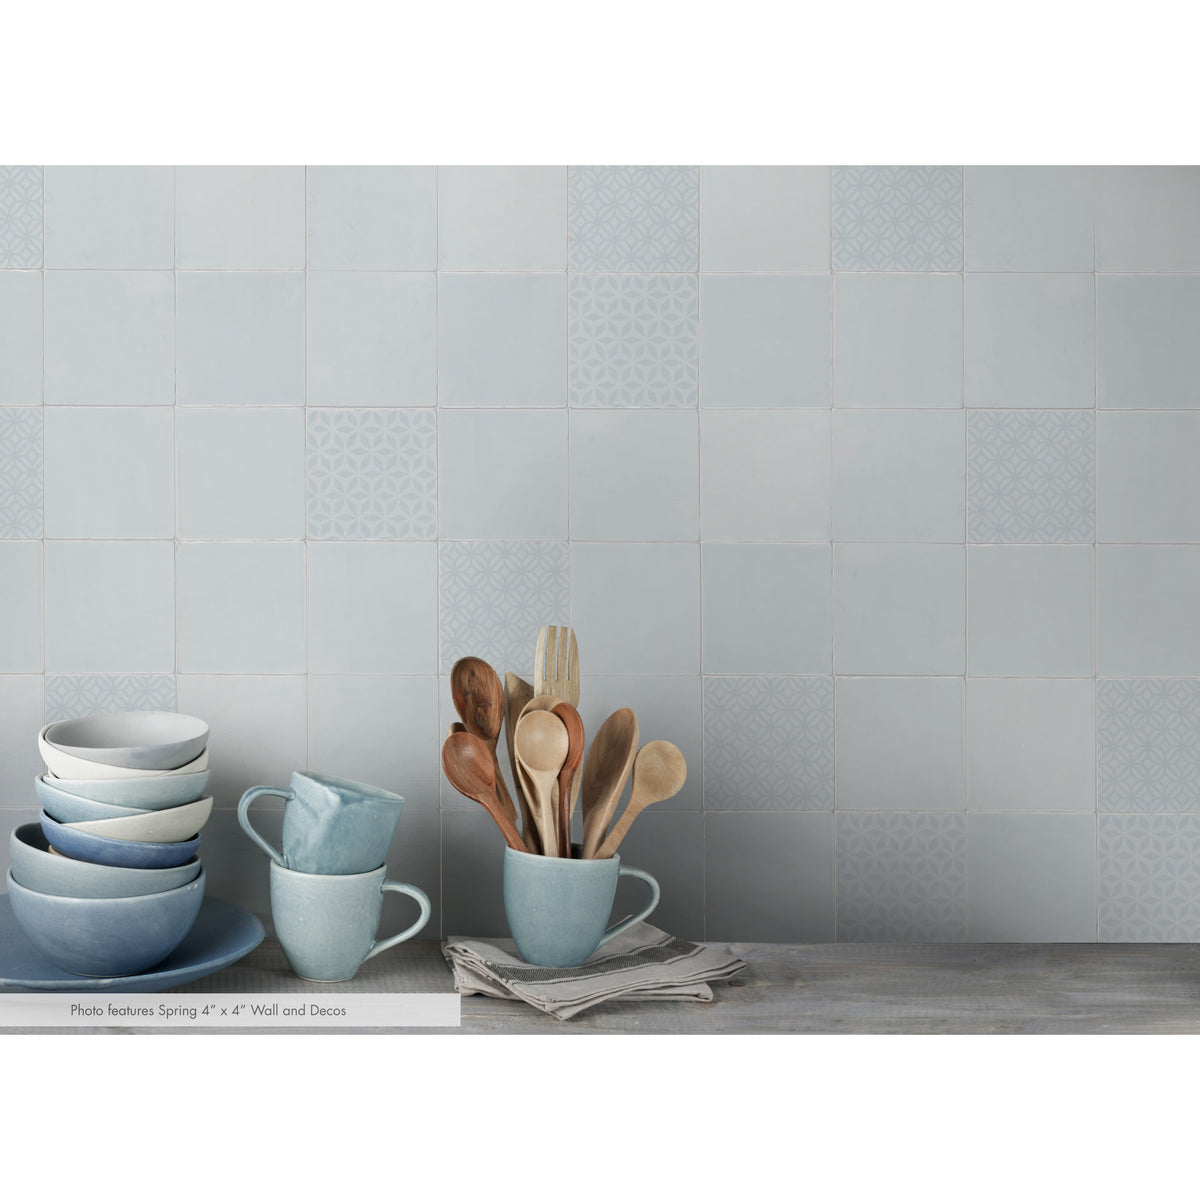 Lungarno - Seasons 4 in. x 4 in. Wall Tile - Summer